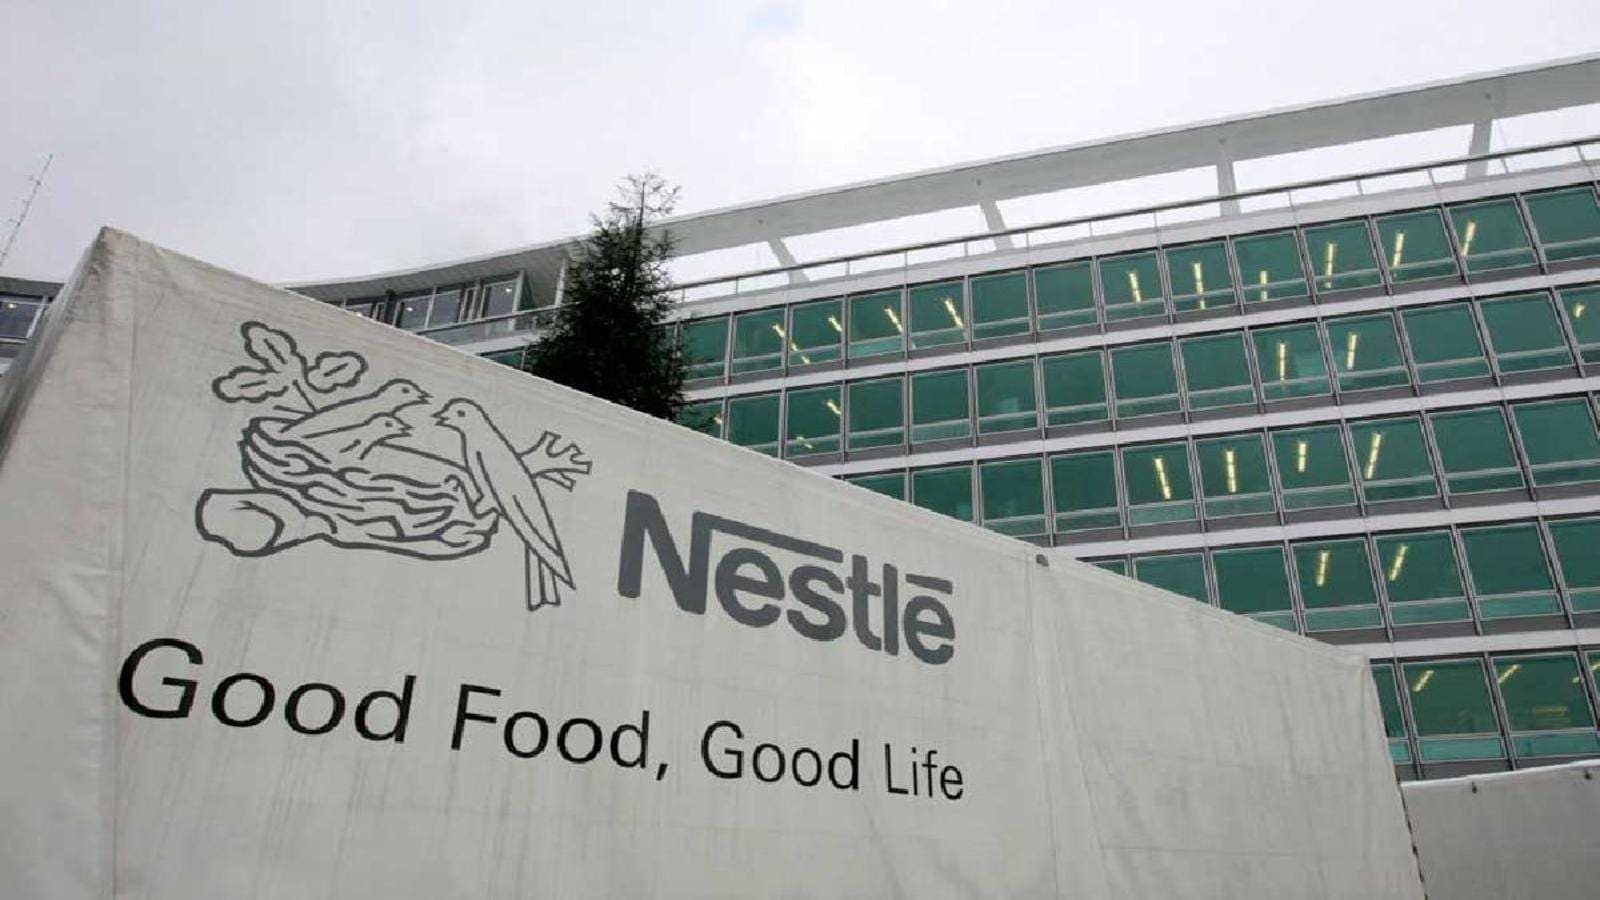 Nestlé adds new Board members, opens US$67m pet food plant expansion in Australia